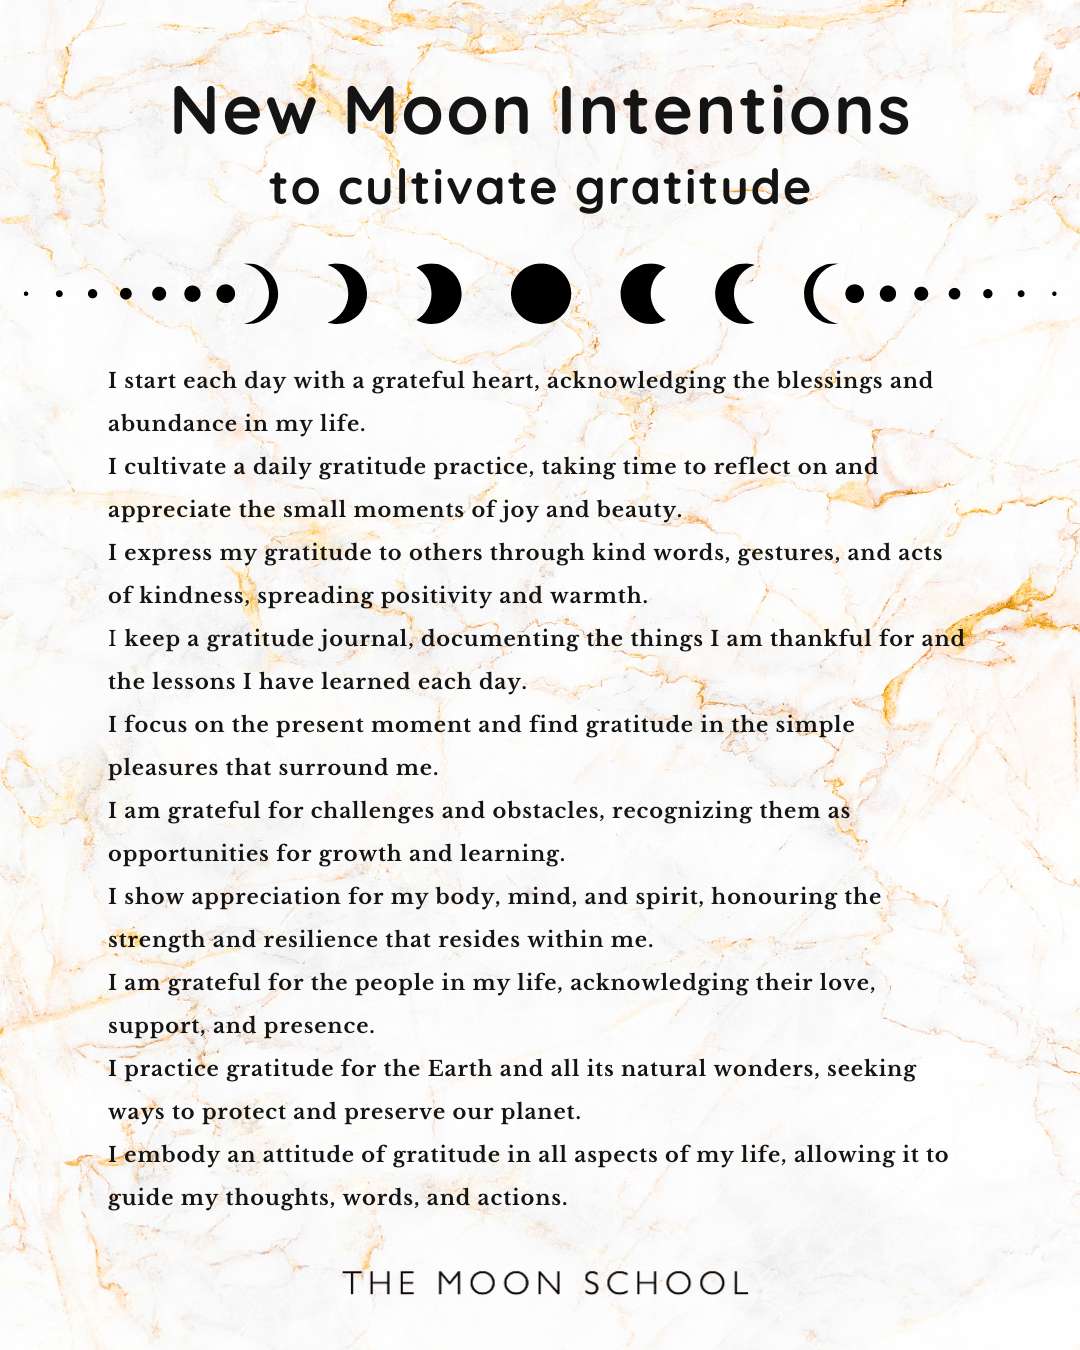 New Moon intentions for gratitude